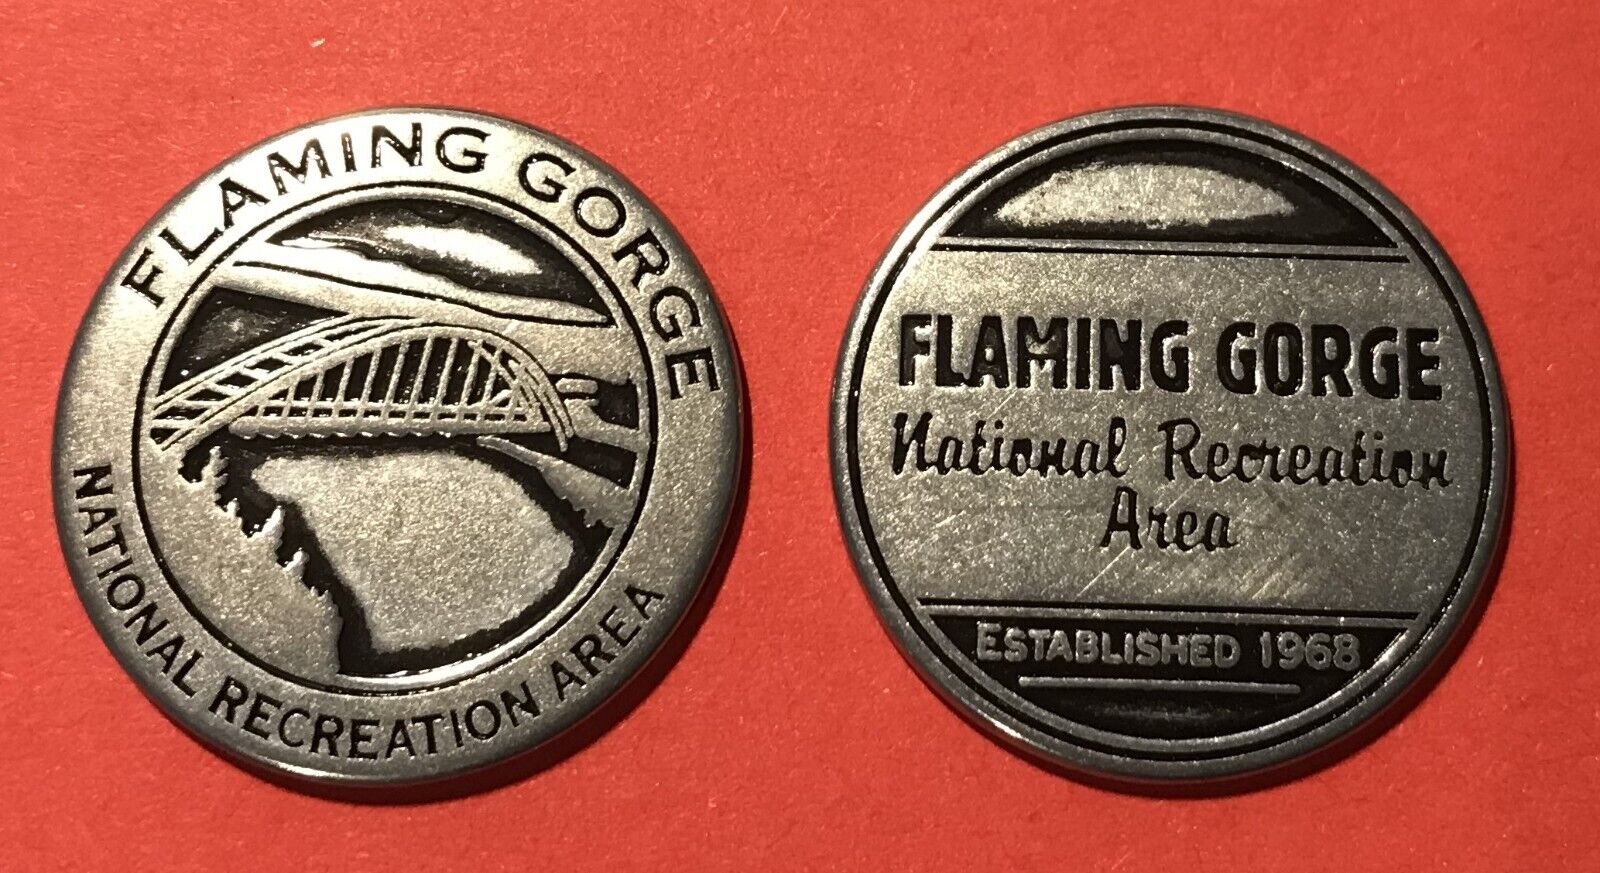 Flaming Gorge National Recreation Area Token